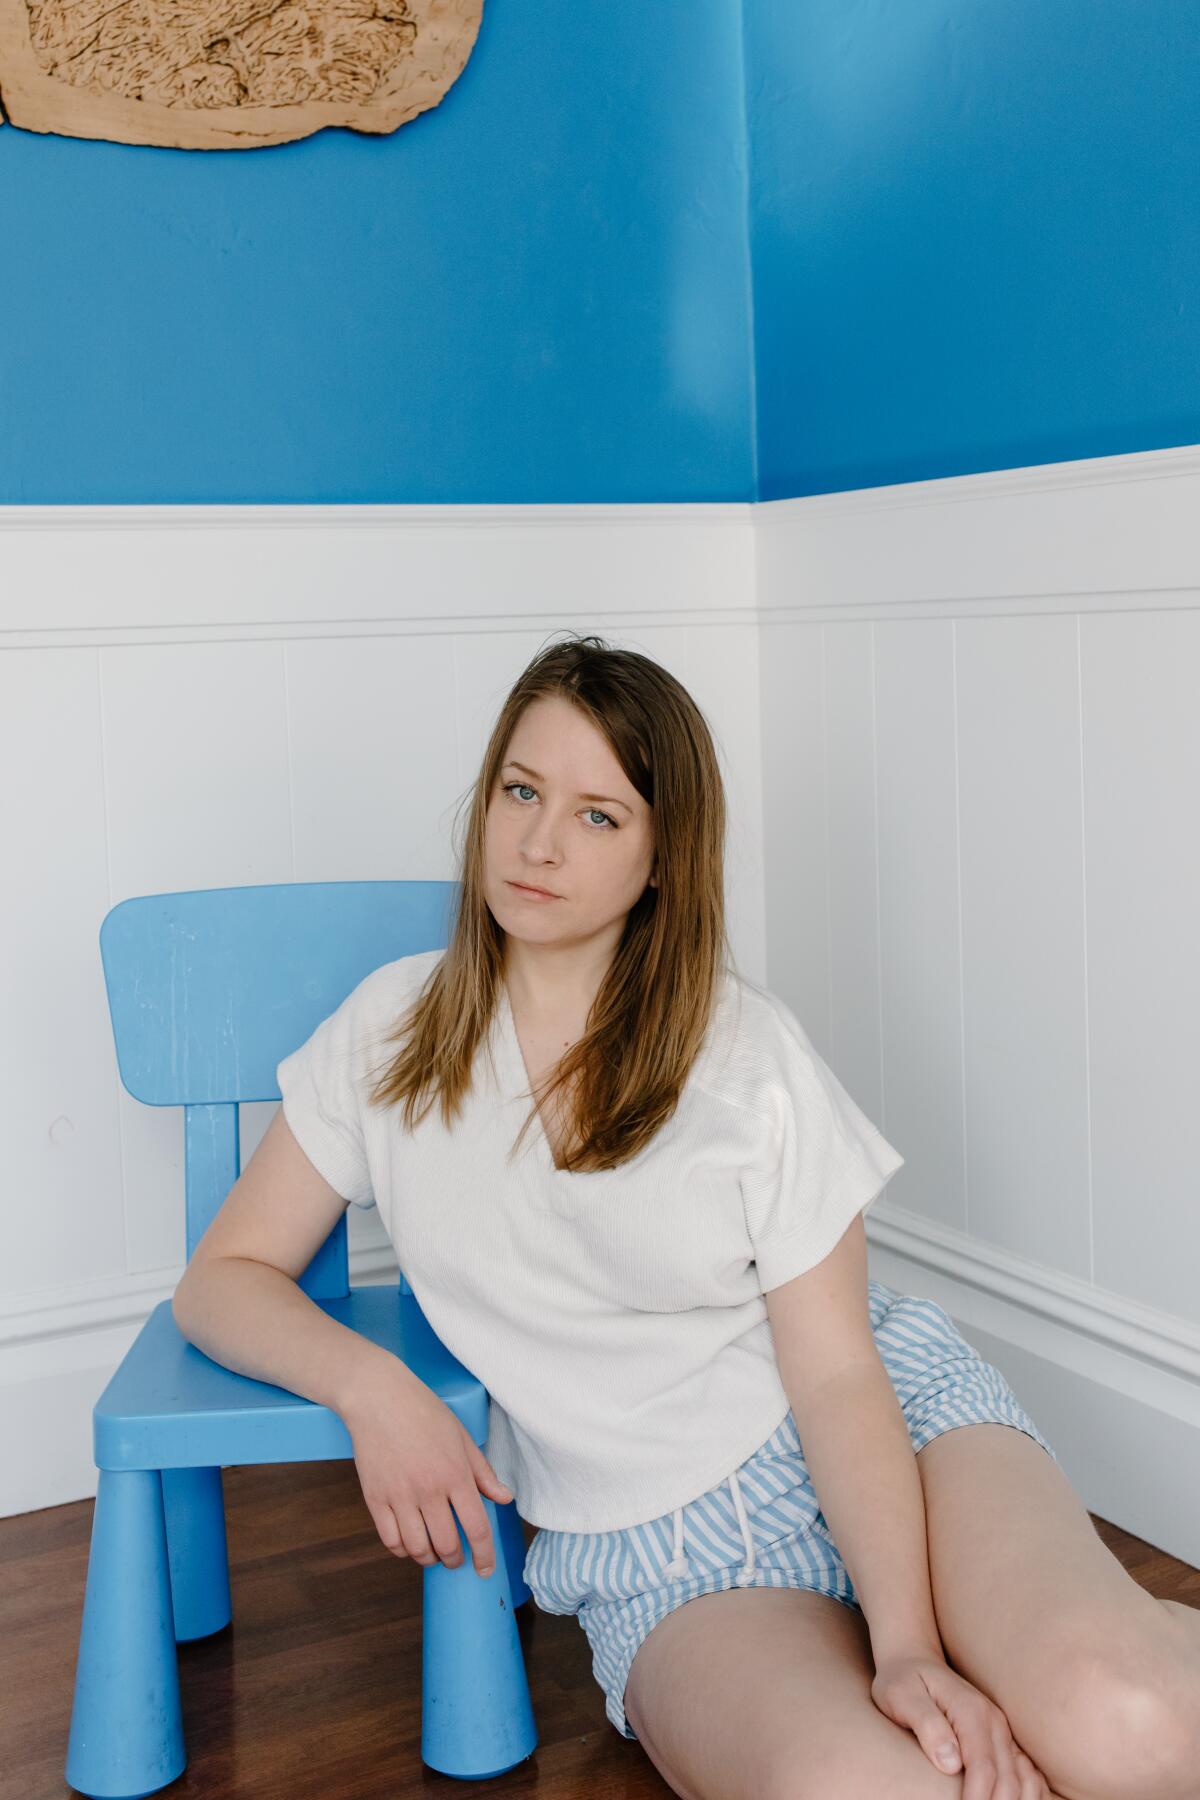 A woman in striped shorts and a white top leans against a chair in the corner of a room.